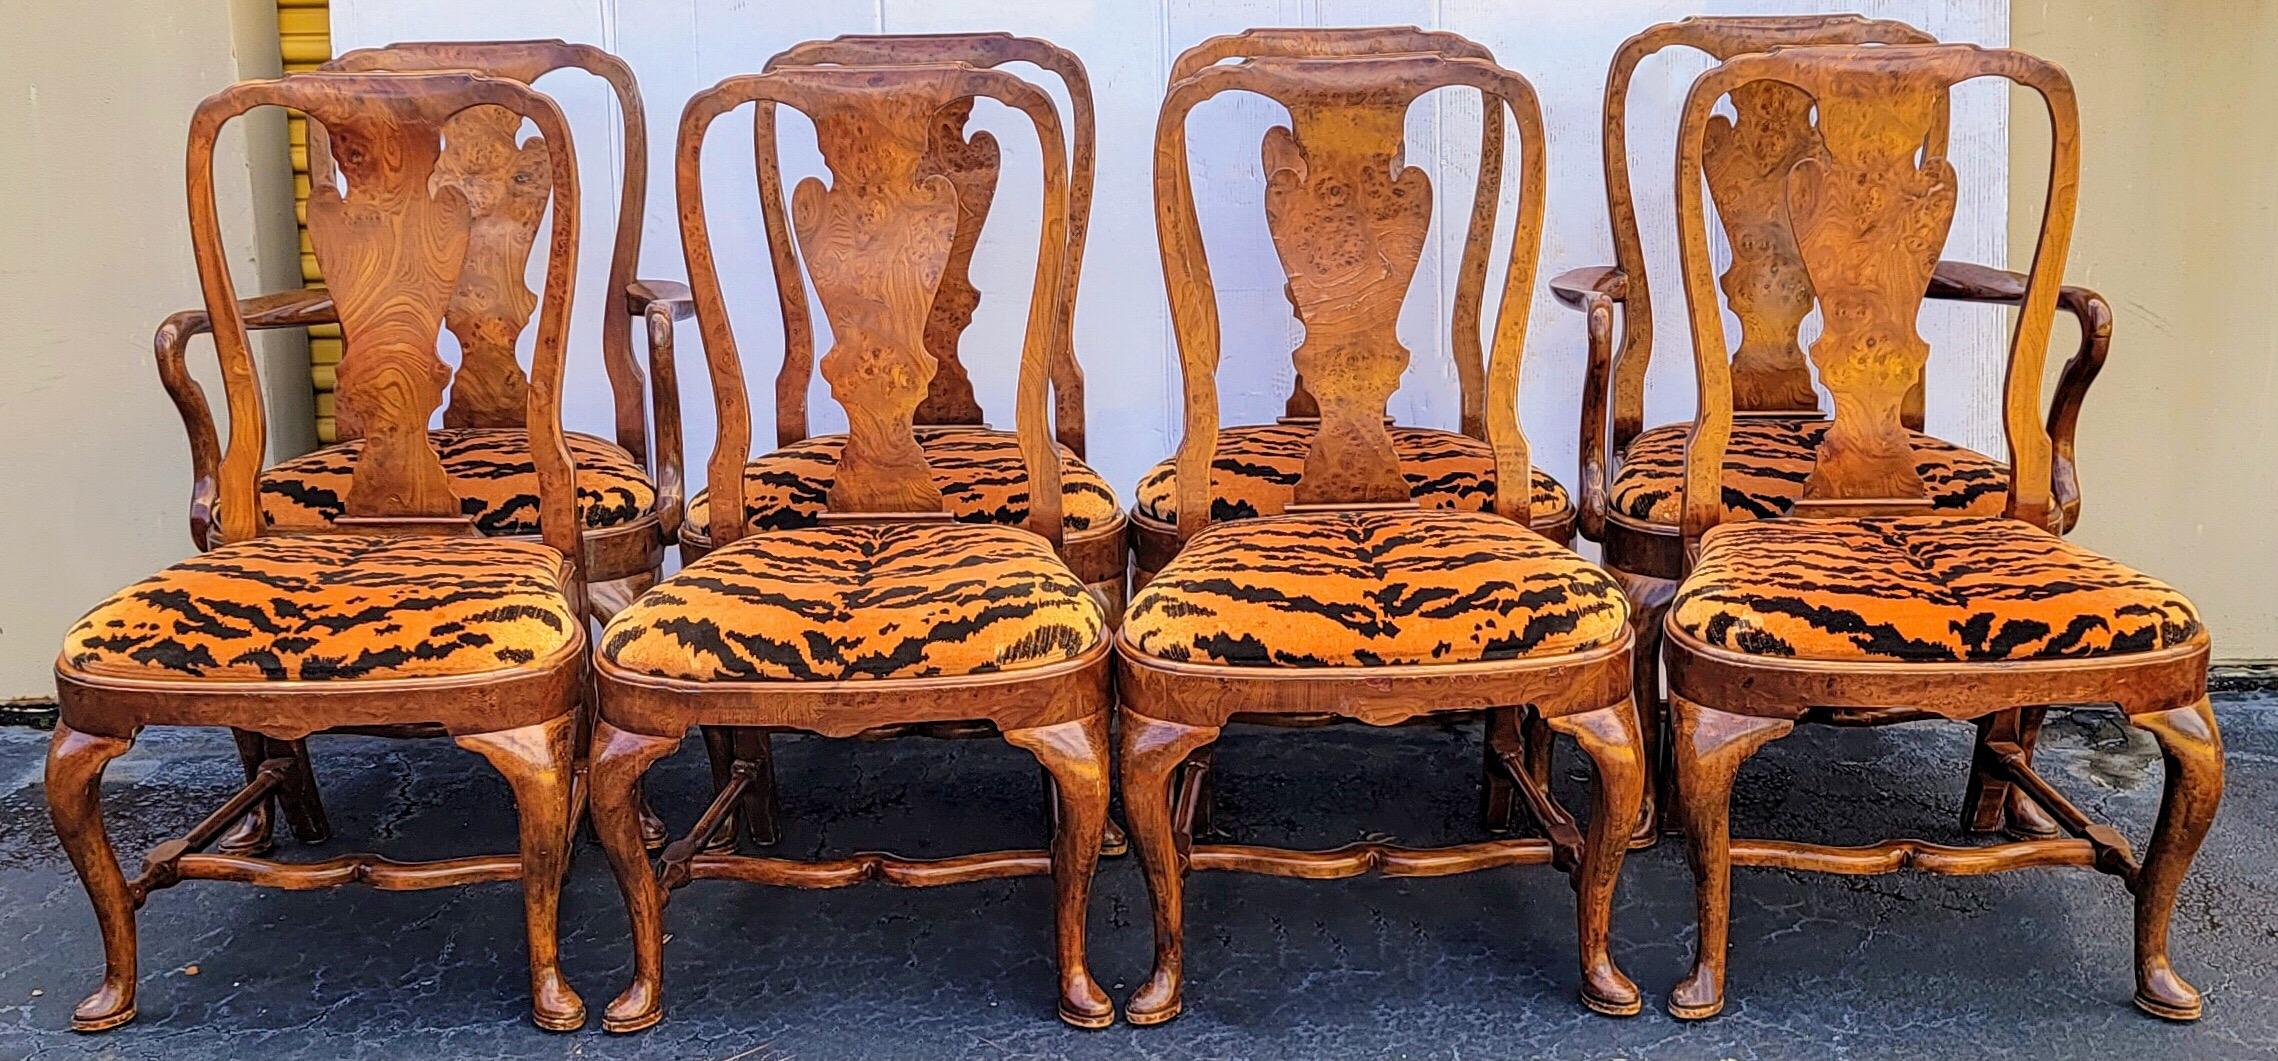 These are stunning. This offering is an early 20th century English Georgian style burl walnut in vintage tiger velvet. There are two arms and six sides. The fabric is purported to be Scalamandre. It does show some lite wear. The frames are being